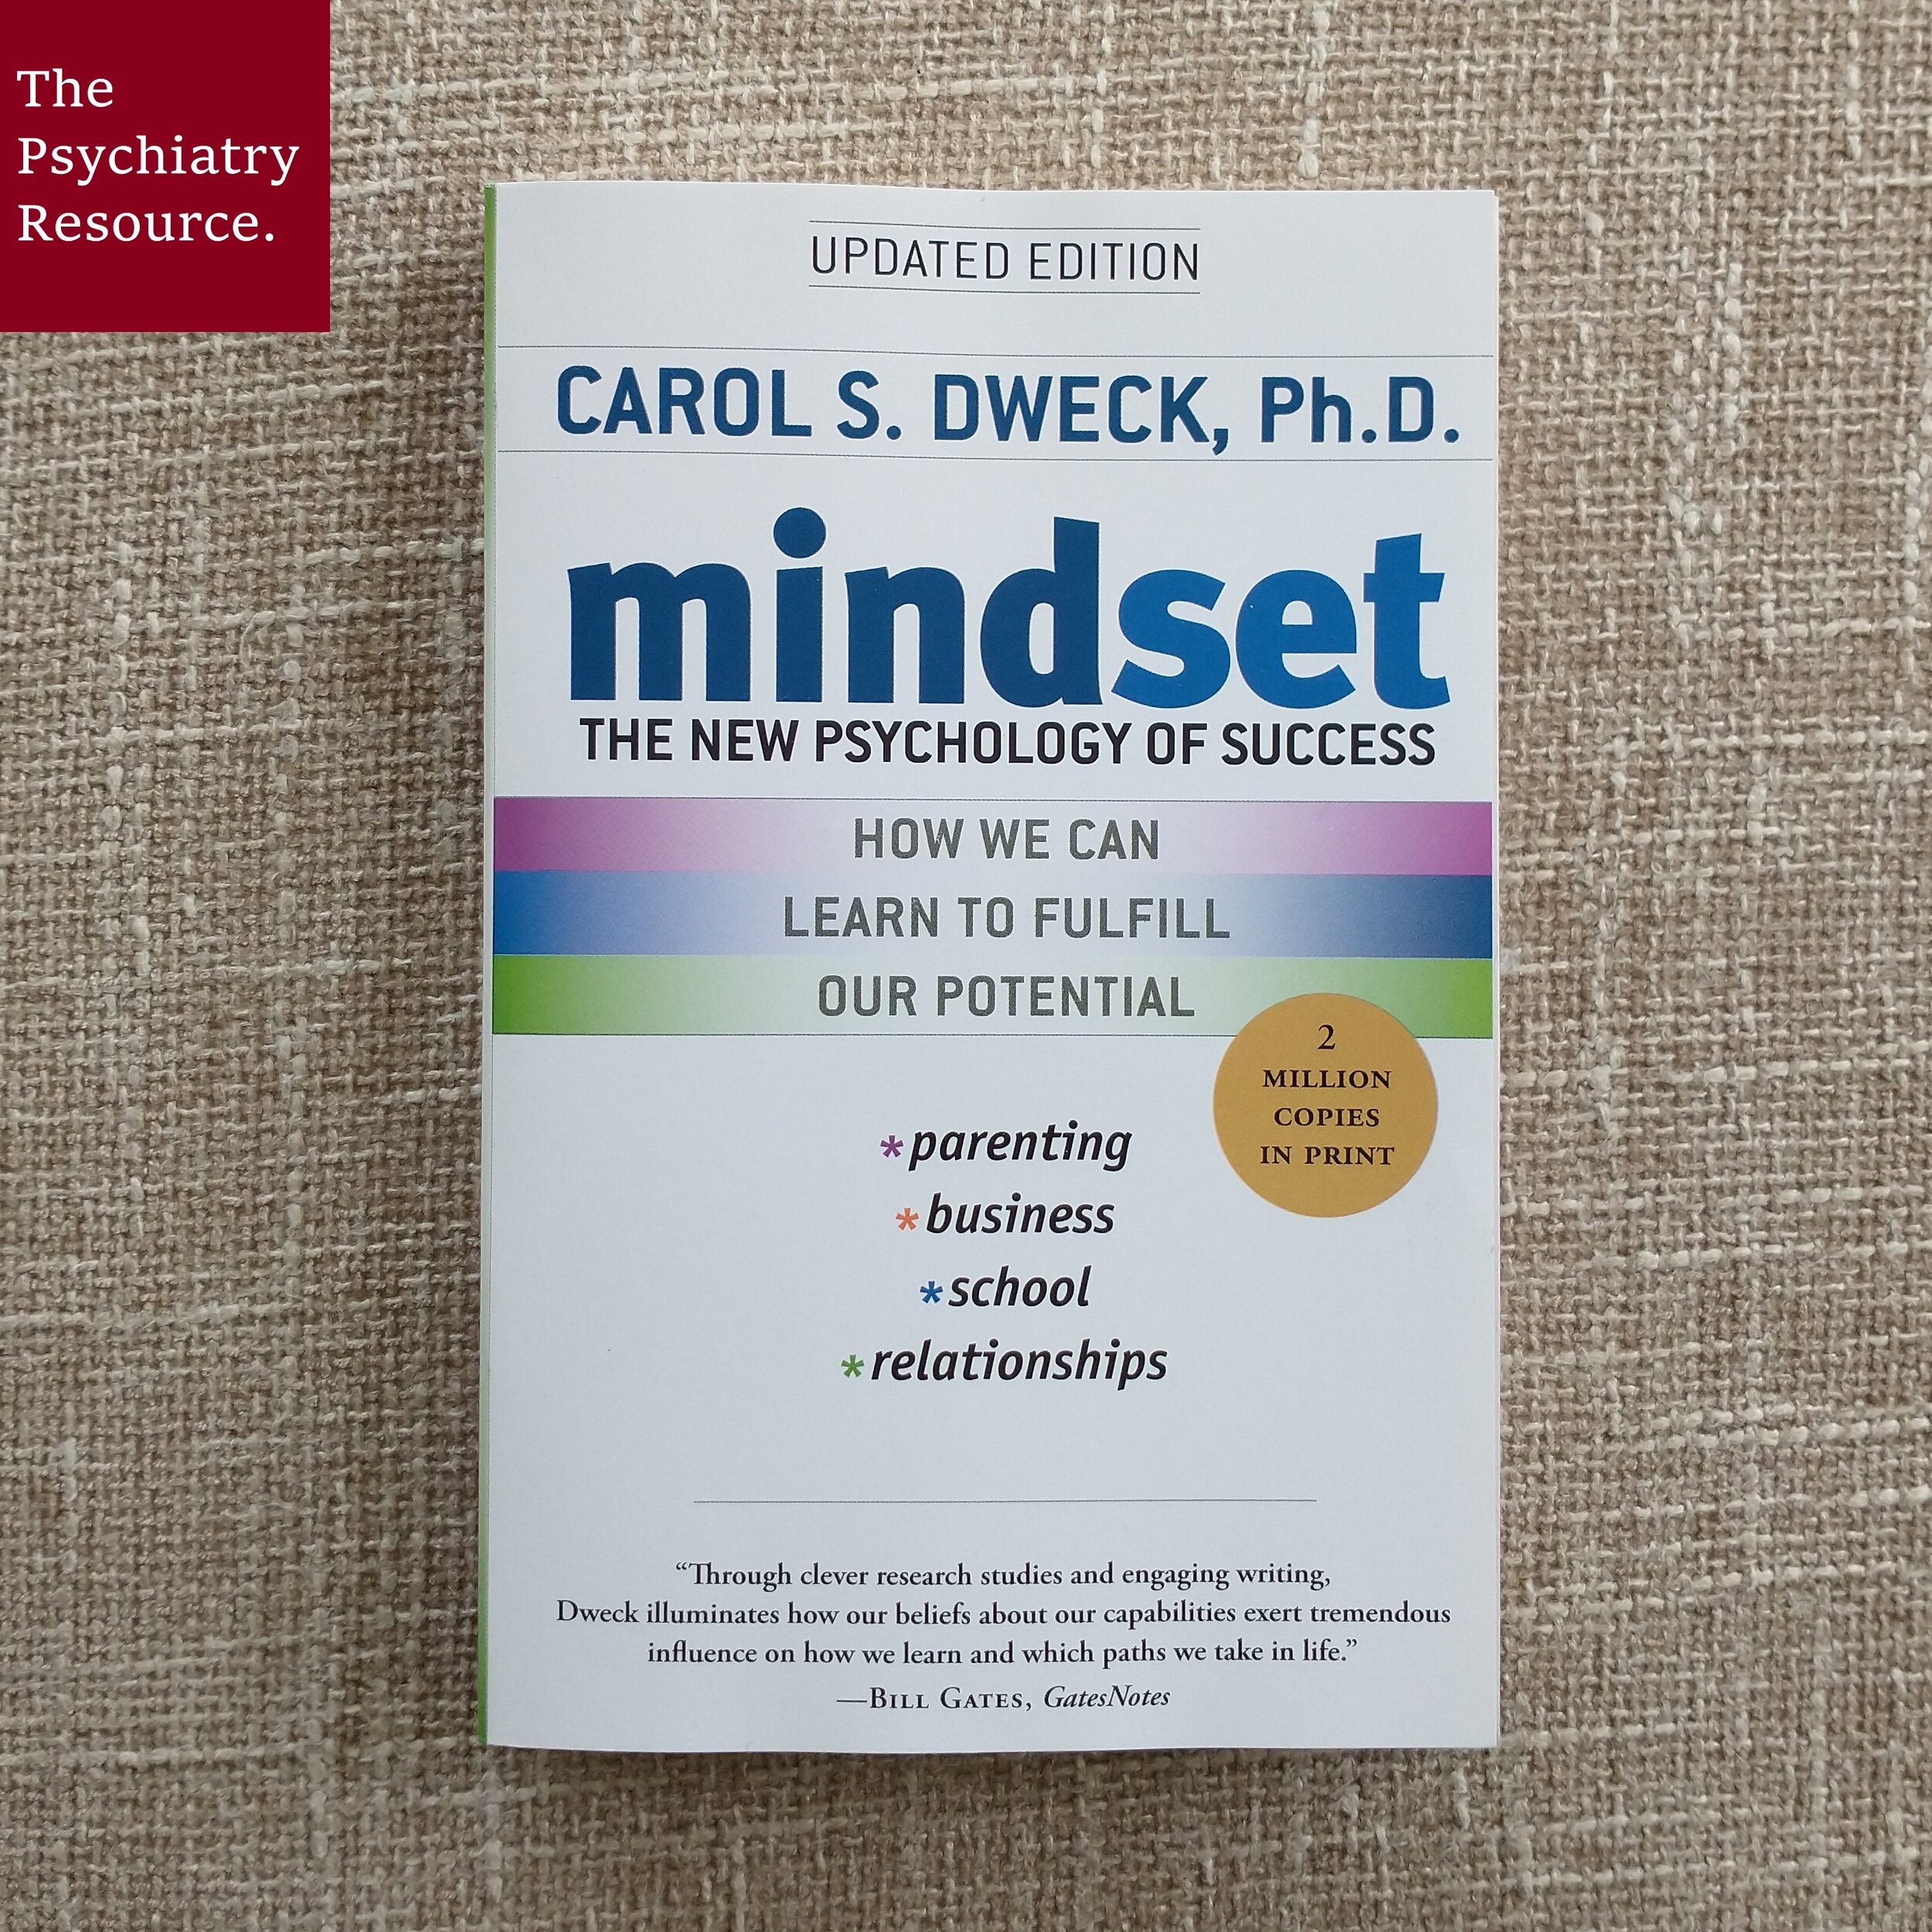 Book Review – Mindset — The Psychiatry Resource